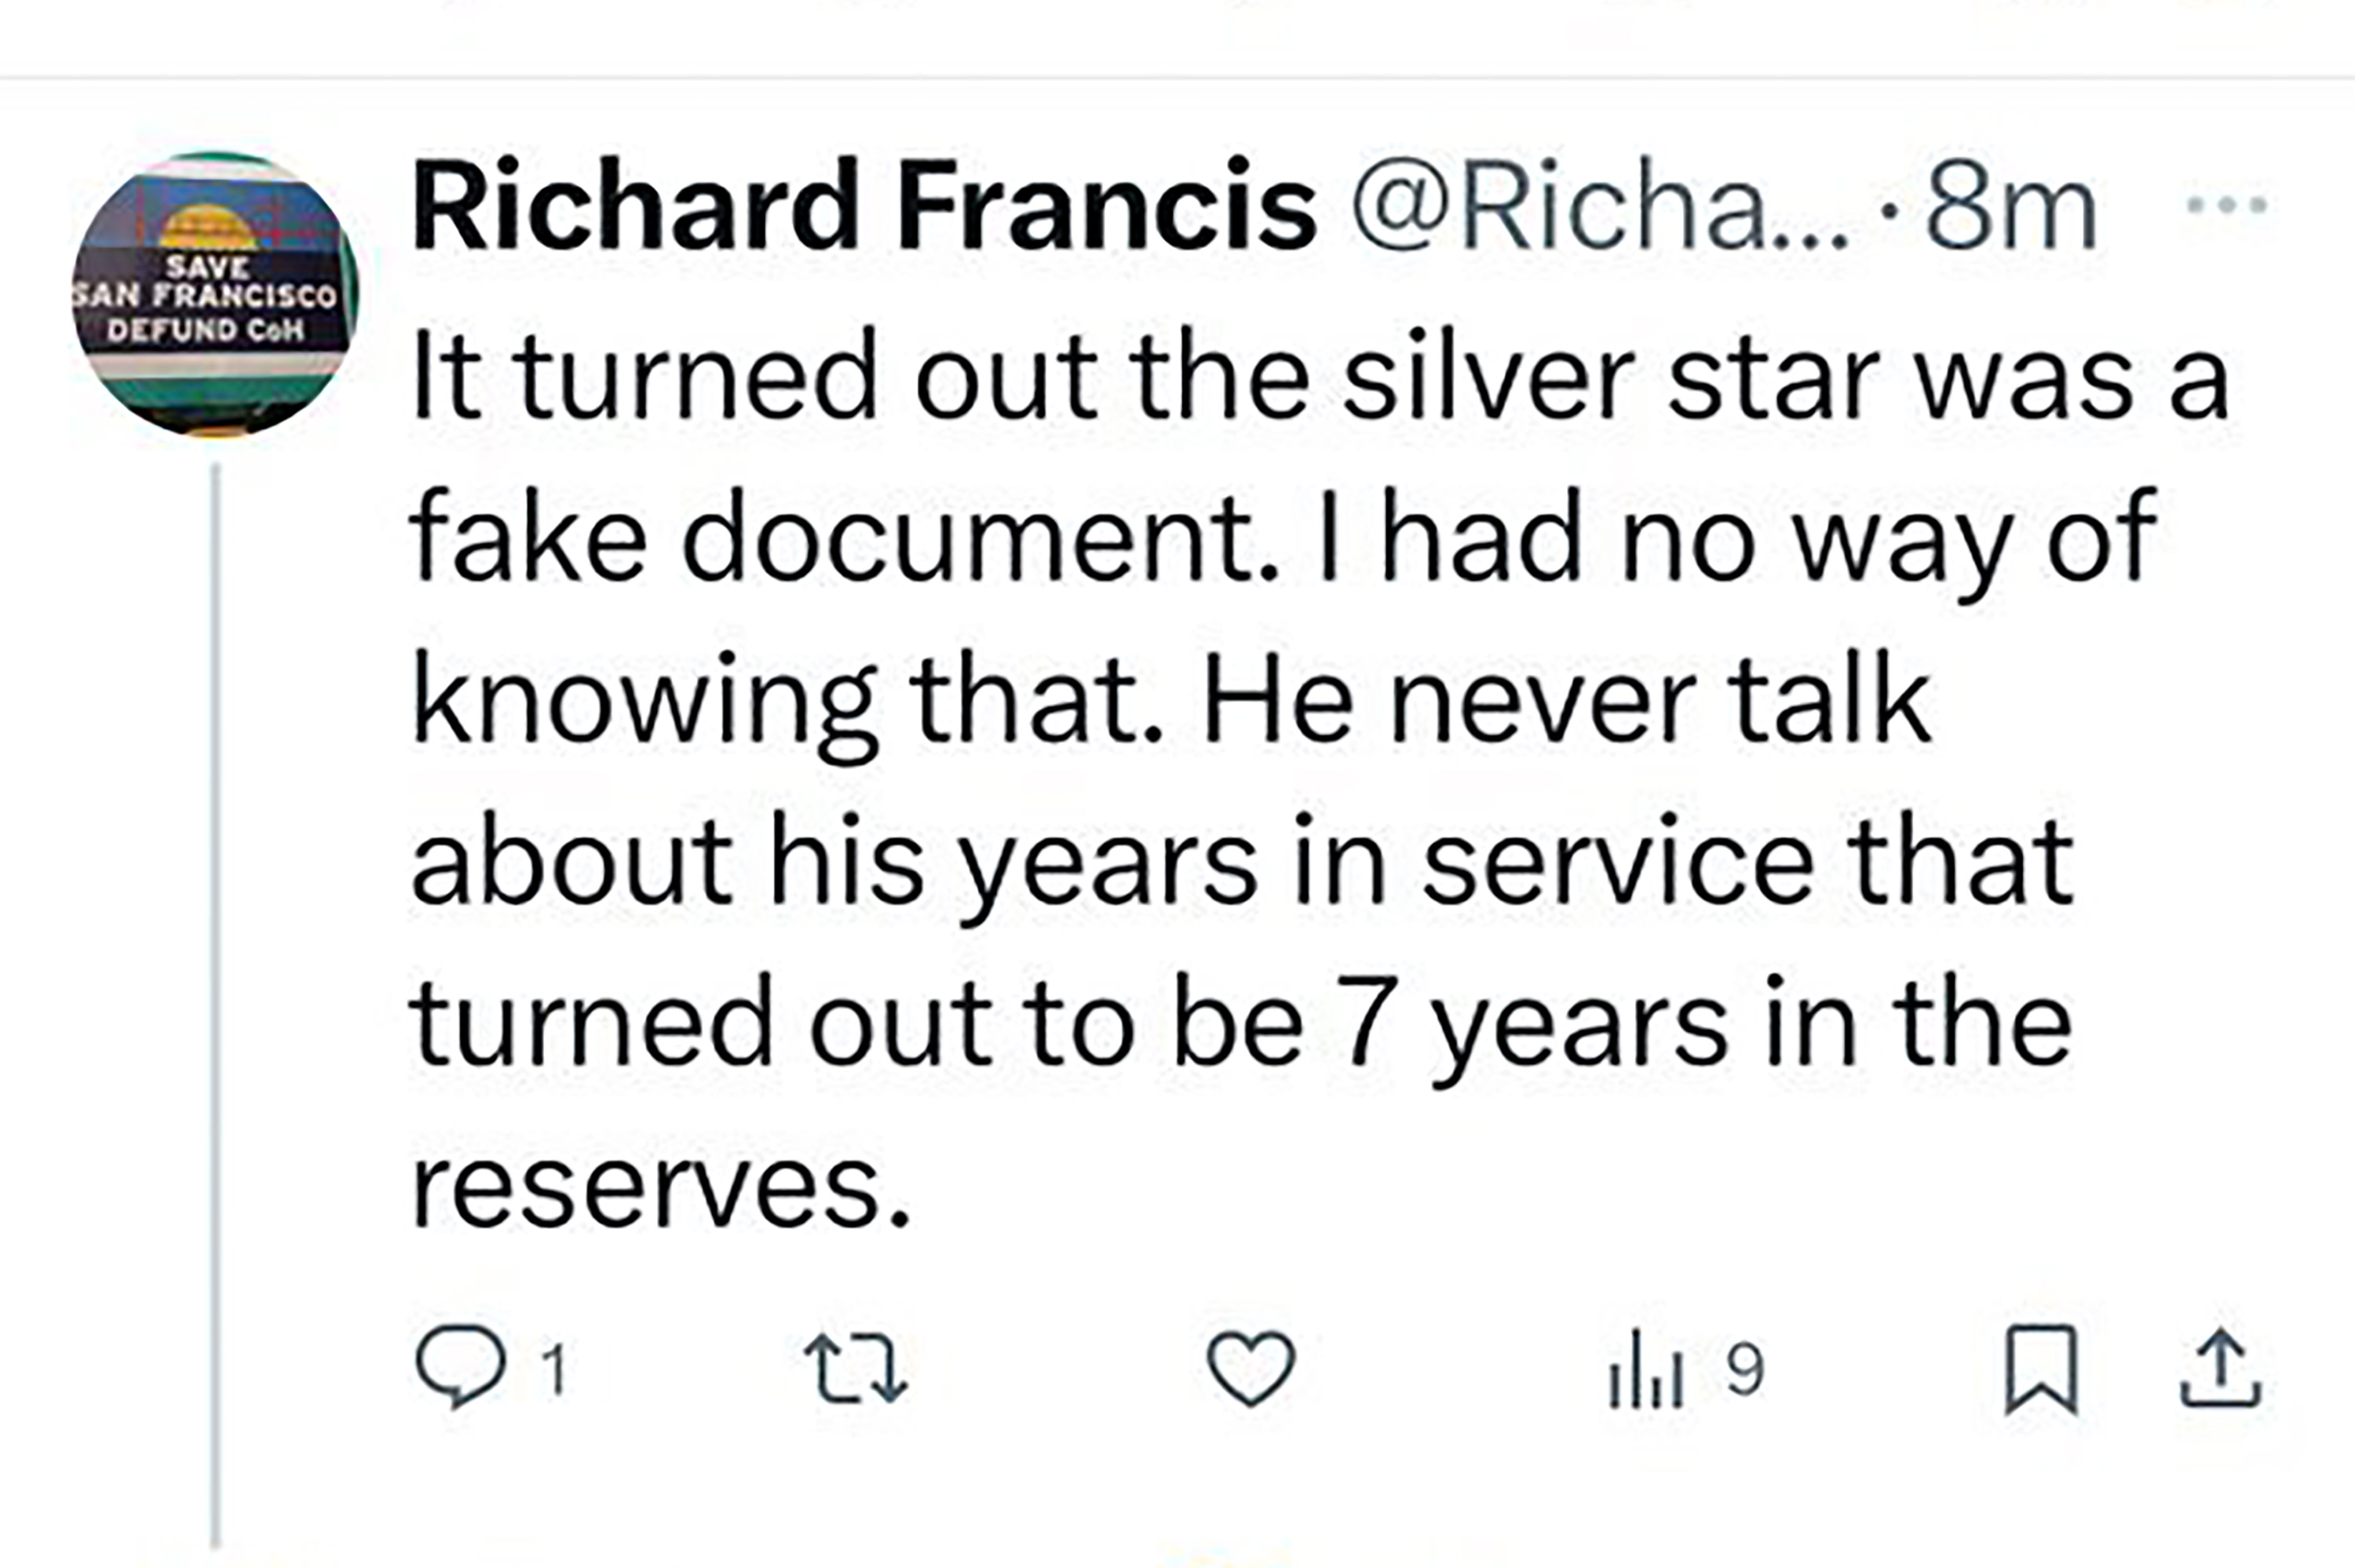 A tweet from someone named Richard Francis discussing a Silver Star document that turned out to be fake.